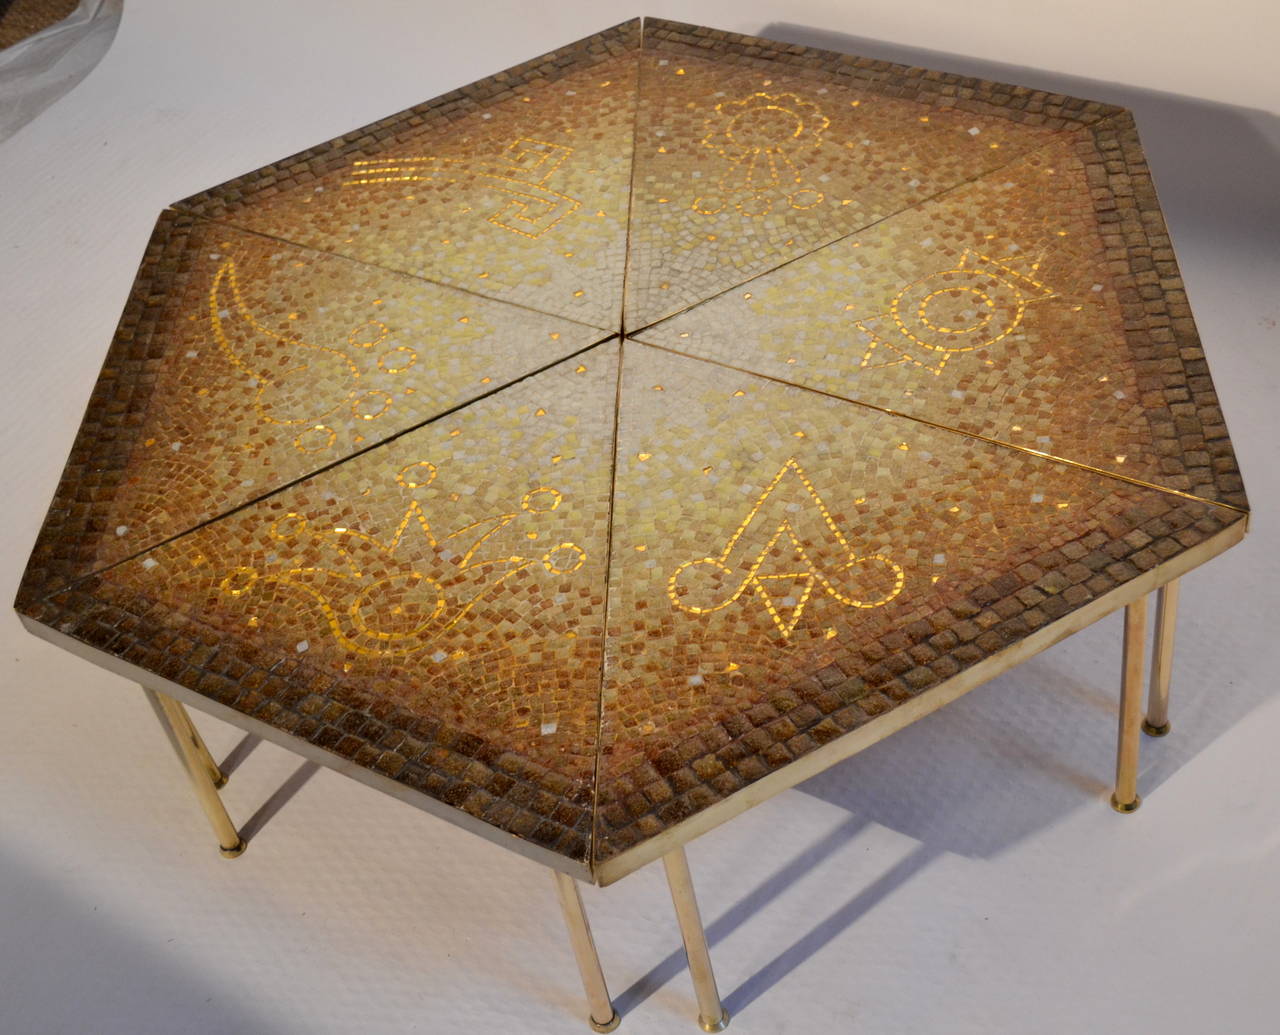 An extraordinary mosaic cocktail table edged in brass with brass legs by Genaro Alvarez created at his Mexico City studio in the mid-1950s.

Each of the 6 triangular tables has an Aztec symbol and randomly placed pieces of gold mirror tile set